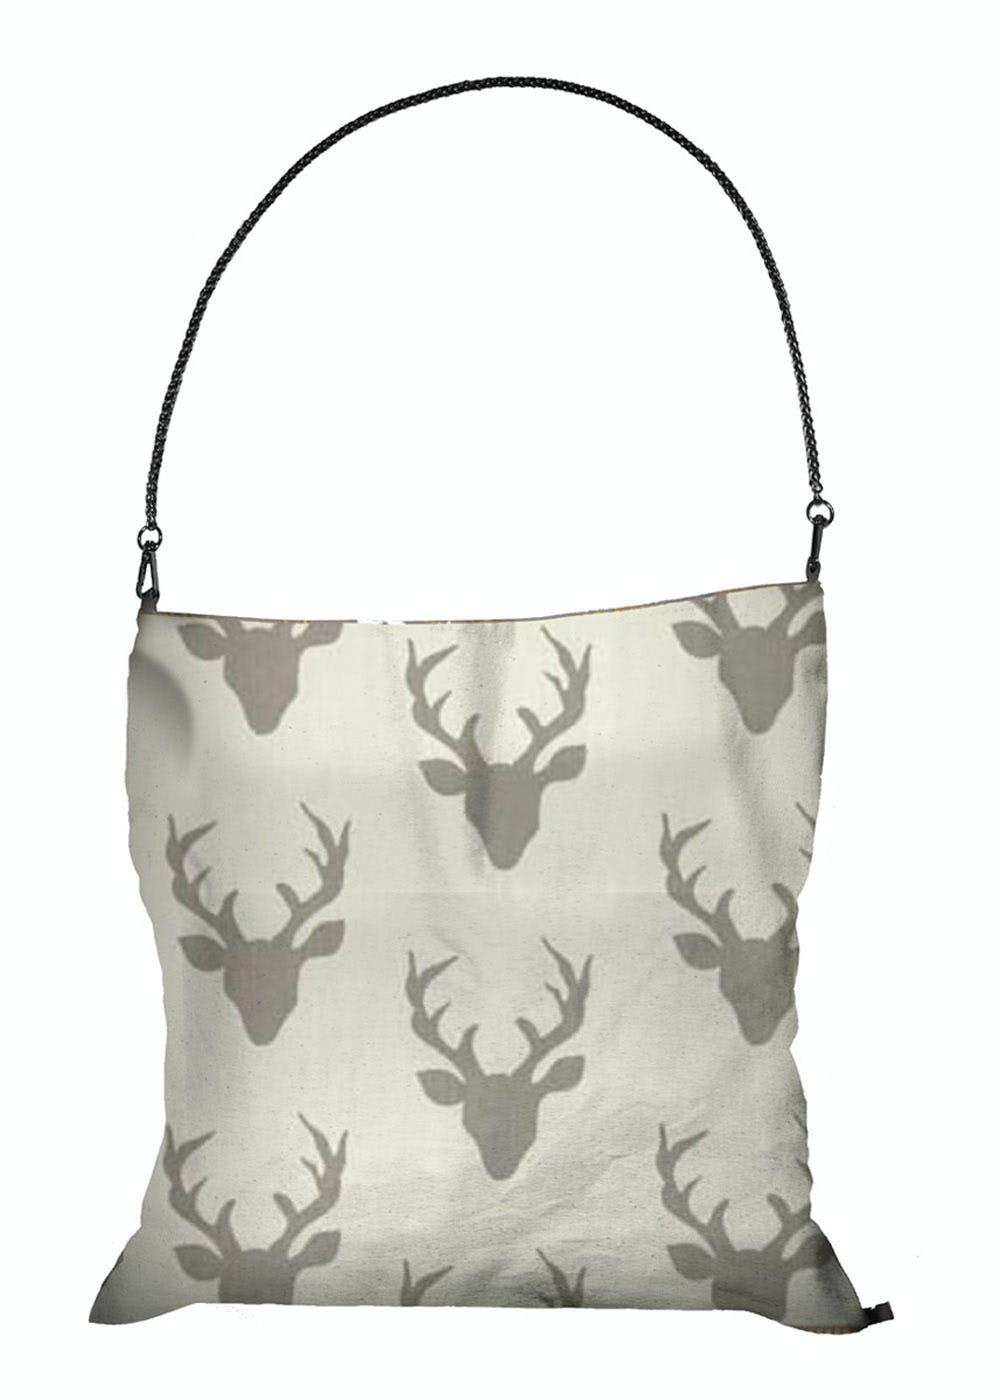 2 in 1 Design Tote Scarf with Print of Barasingha & Forest Splendor